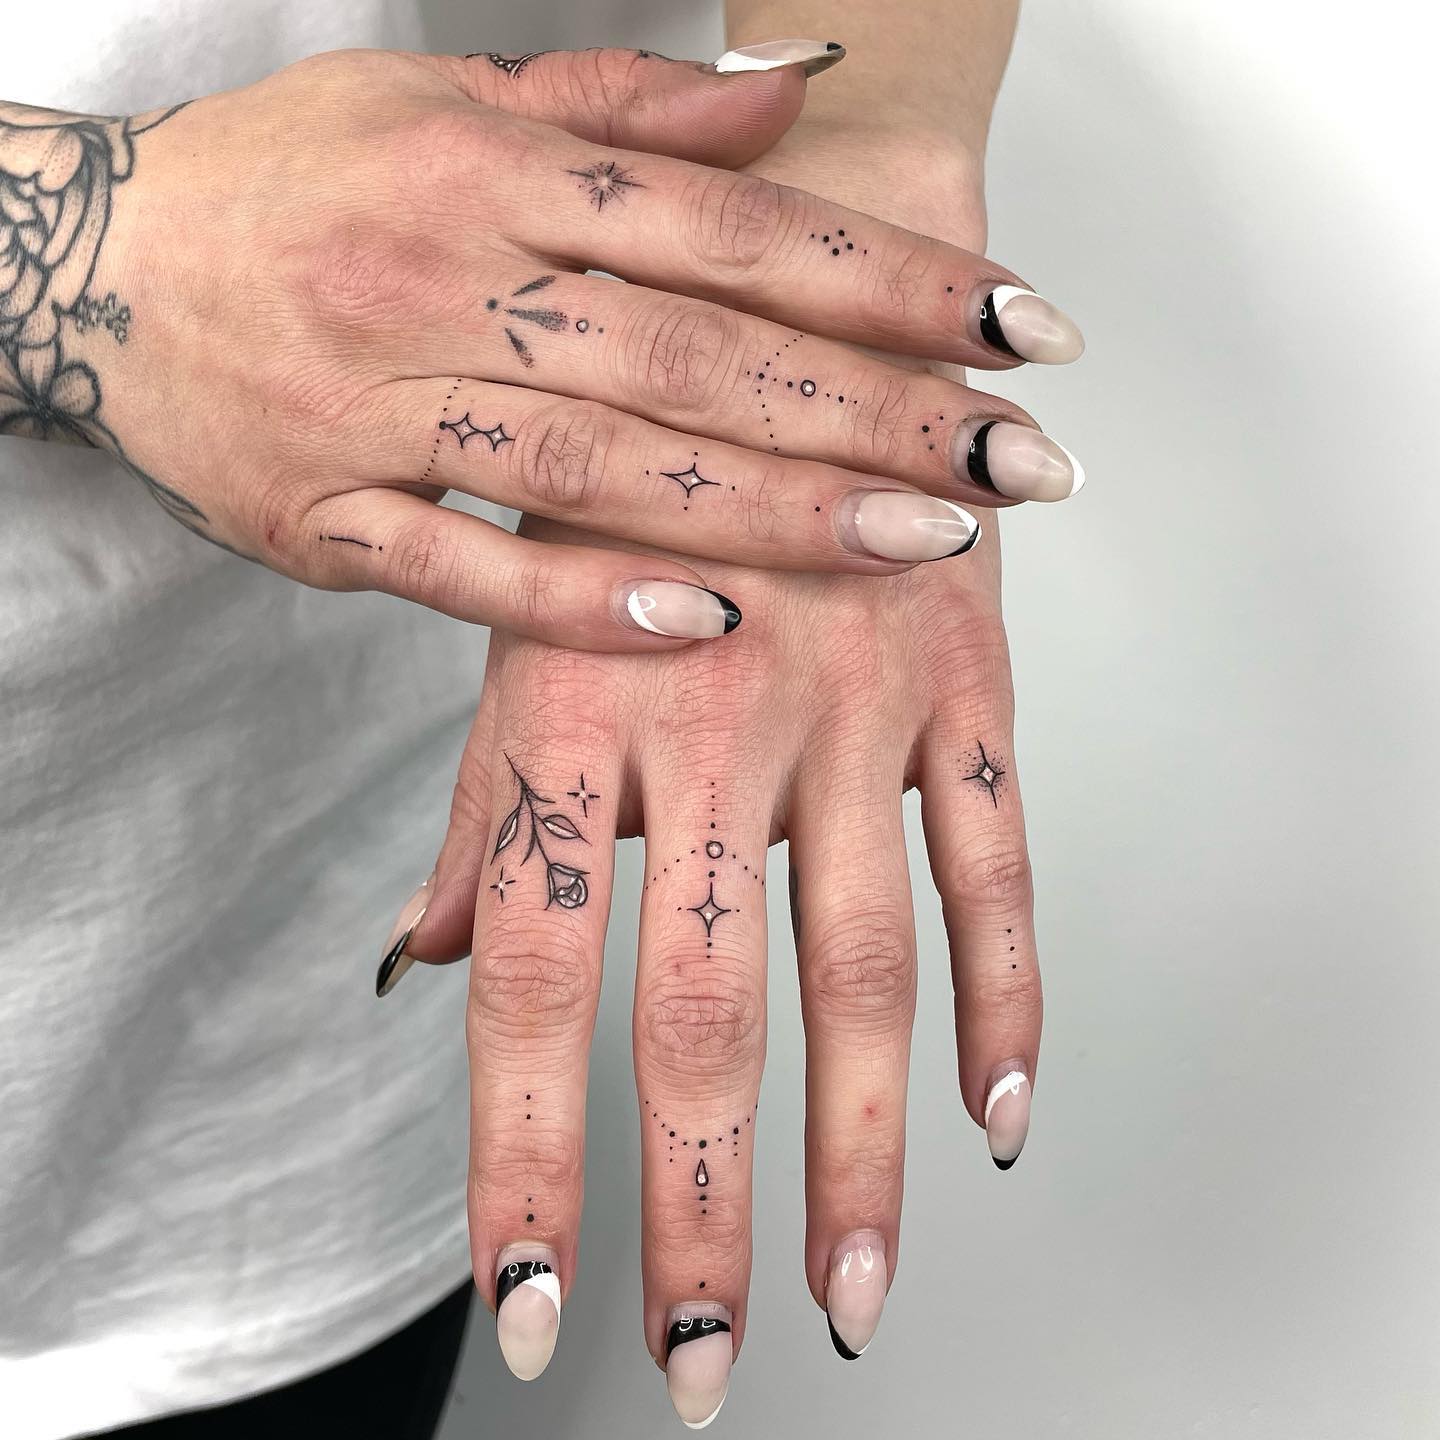 Free Images : writing, hand, person, leg, finger, tattoo, arm, close up,  human body, thigh, skin, 2016366, indieedtech, interaction, sense 5184x3456  - - 197099 - Free stock photos - PxHere